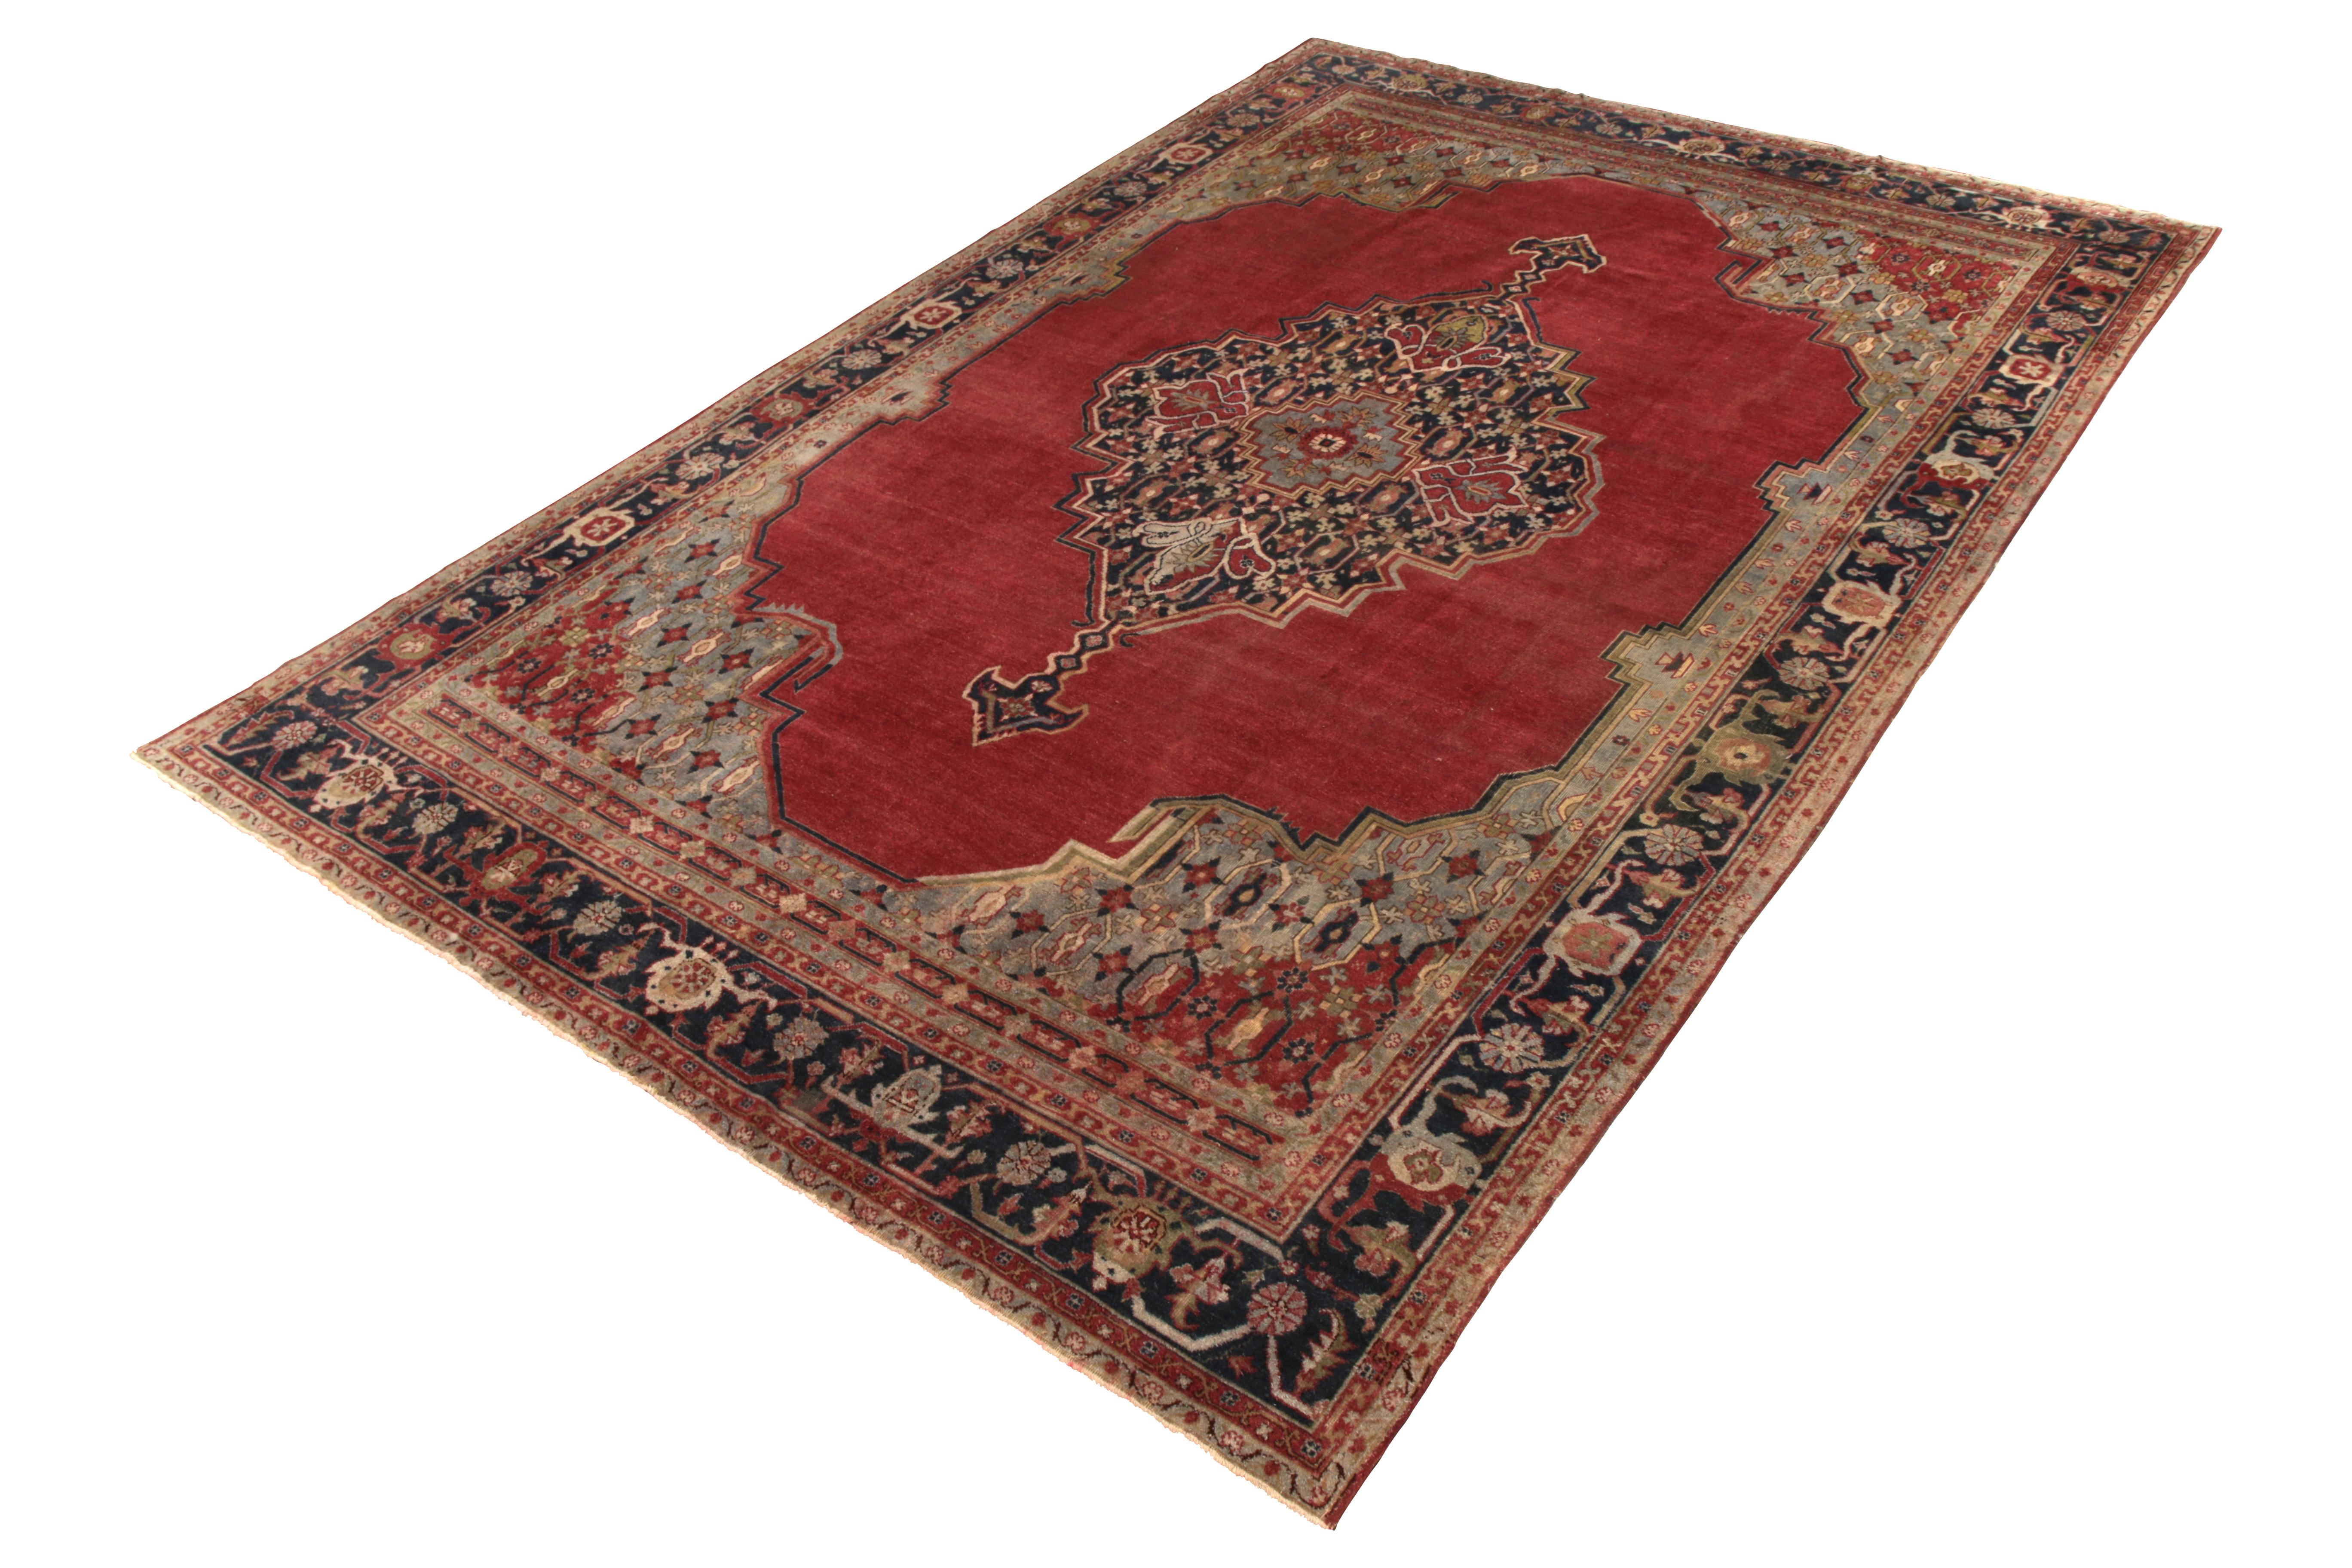 Handmade with hand knotted wool originating from Turkey circa 1890-1900, this item is an antique rug enjoying an influence from transitional Sparta rug traits, as well as a fabulous play of red and blue in a naturally arresting medallion style